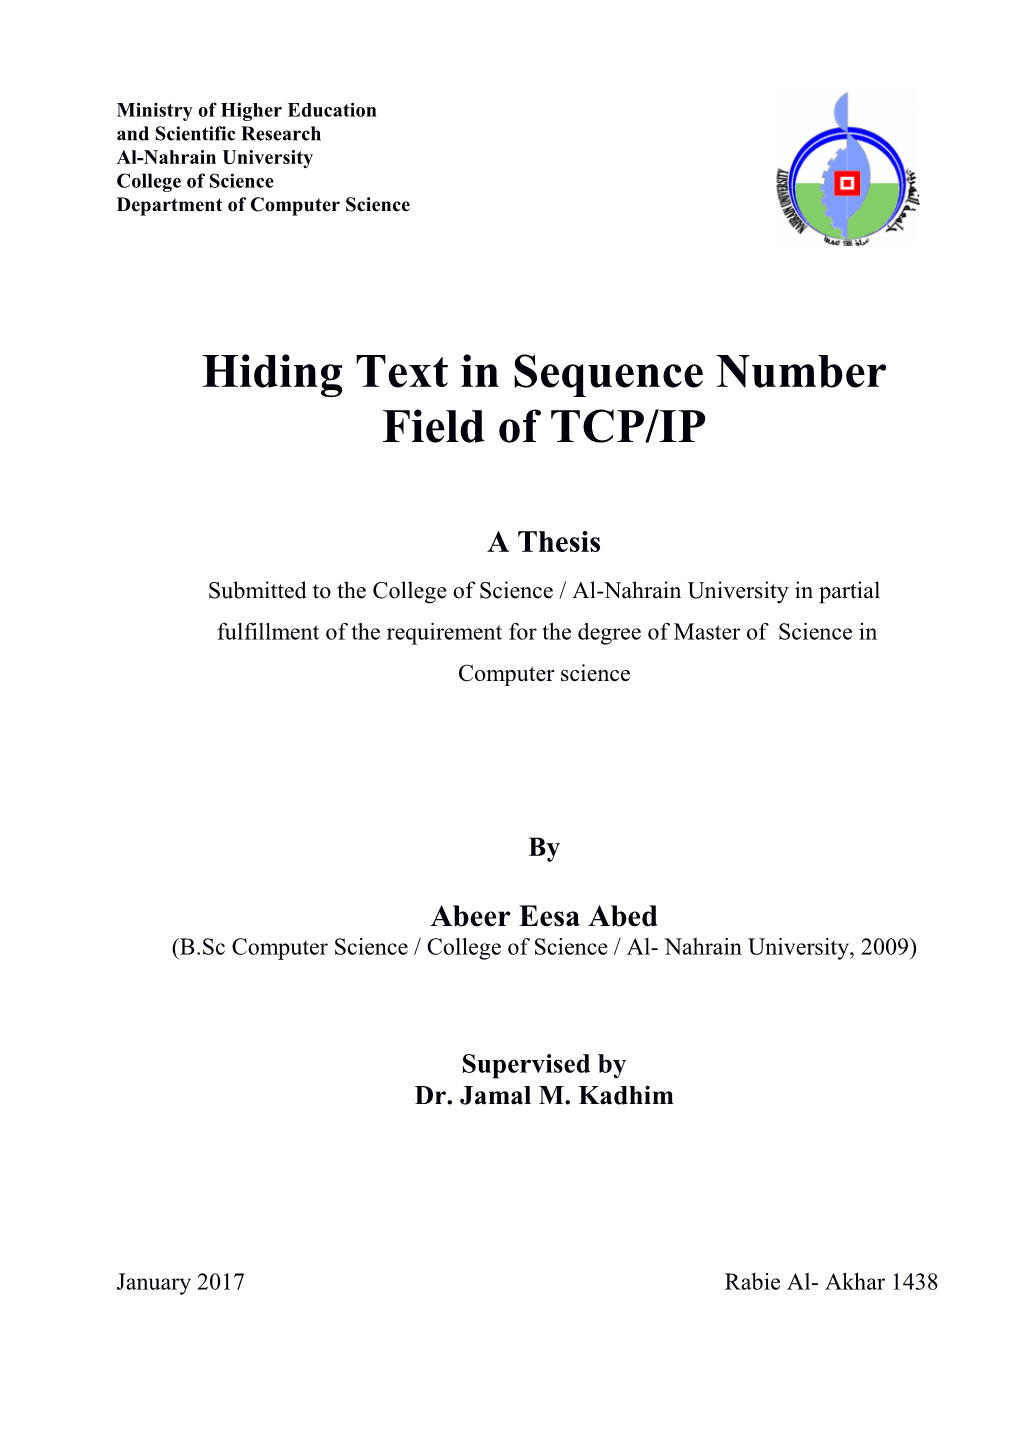 Hiding Text in Sequence Number Field of TCP/IP